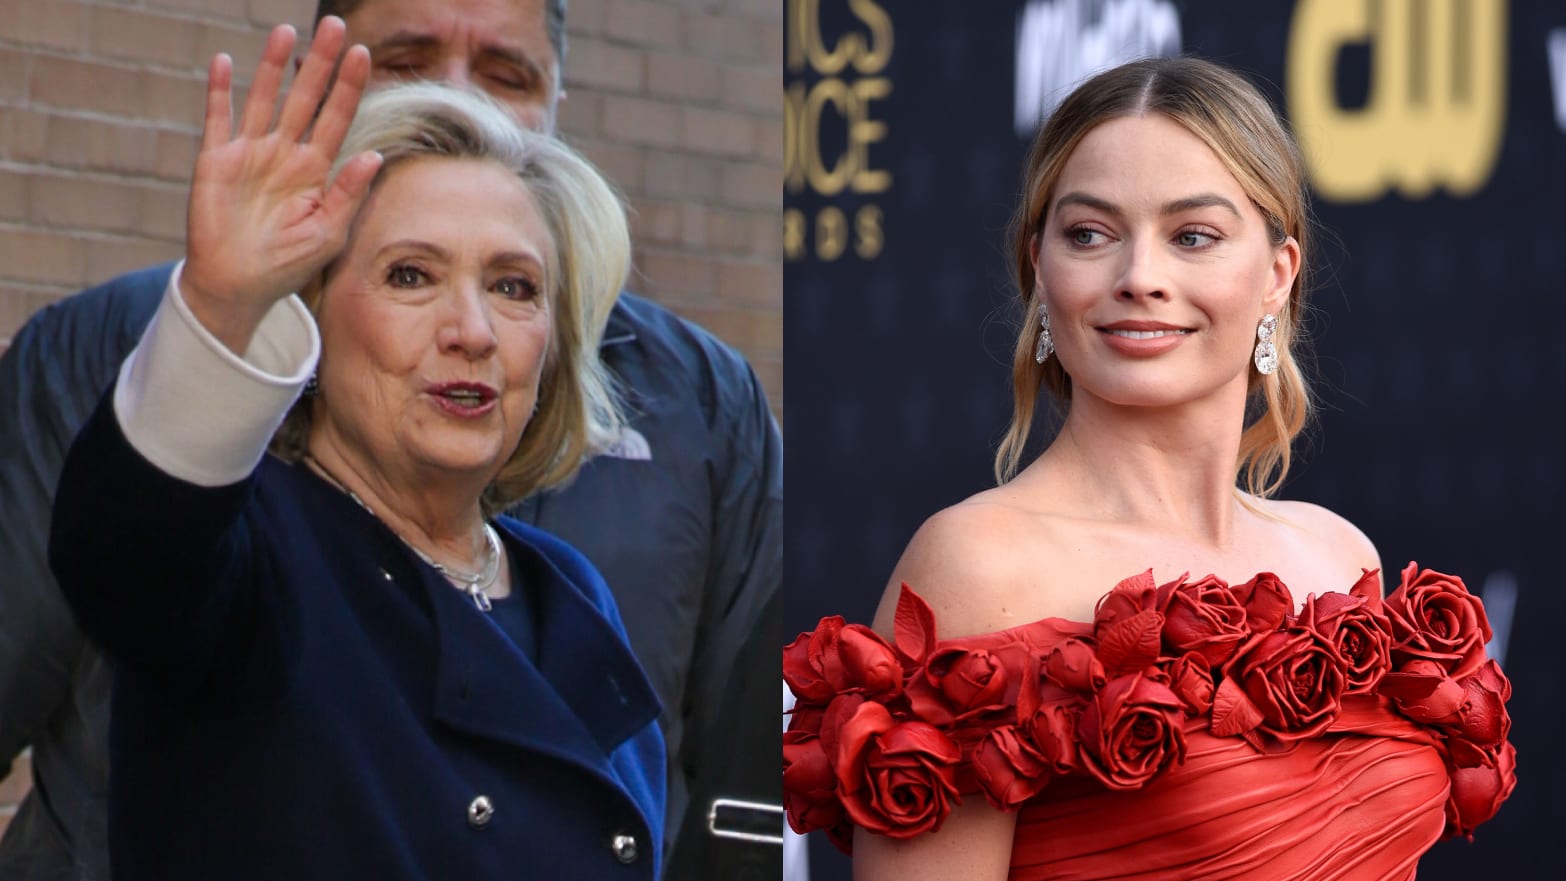 Hillary Clinton Voices Support For Margot Robbie And Greta Gerwig After ‘Barbie’ Snub